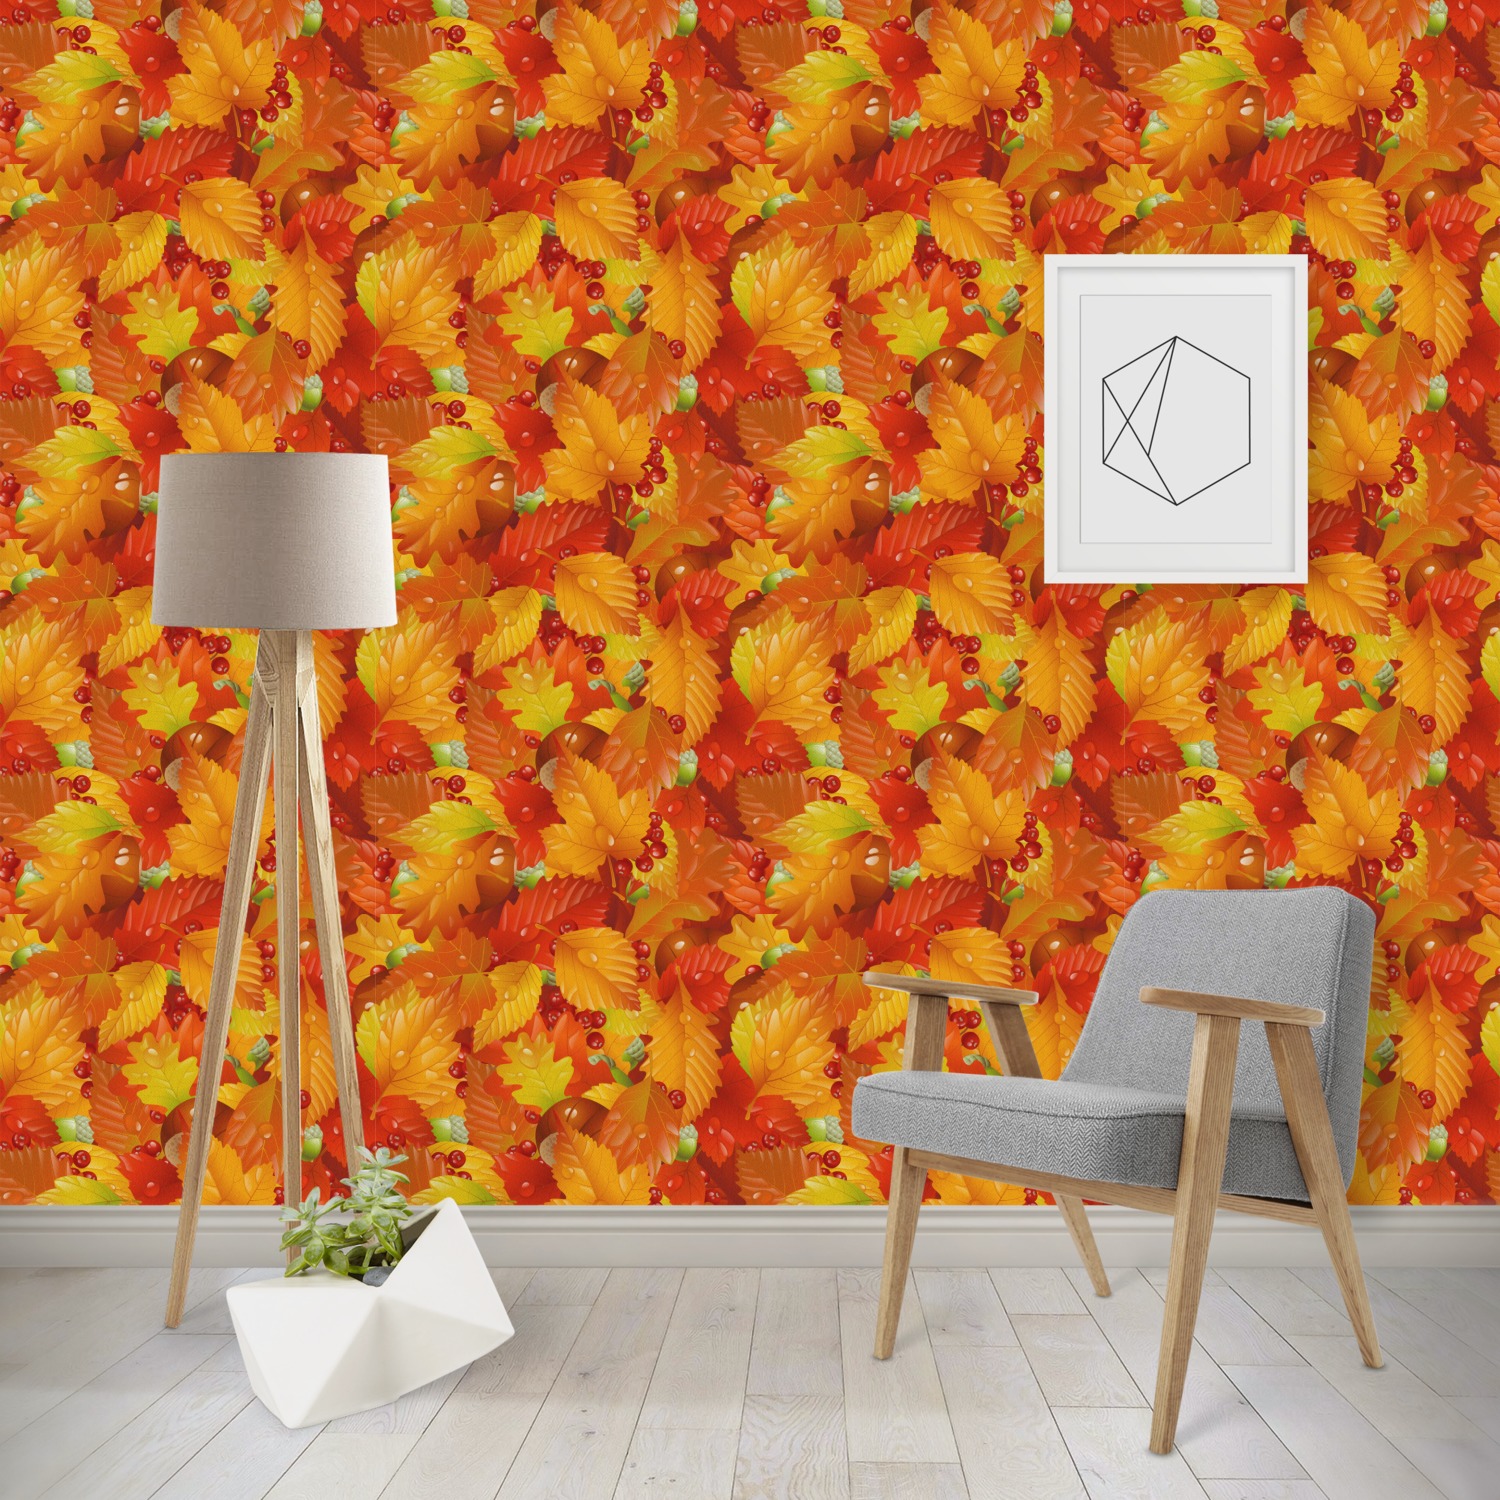 Fall Leaves Wallpaper & Surface Covering (Peel & Stick - Repositionable